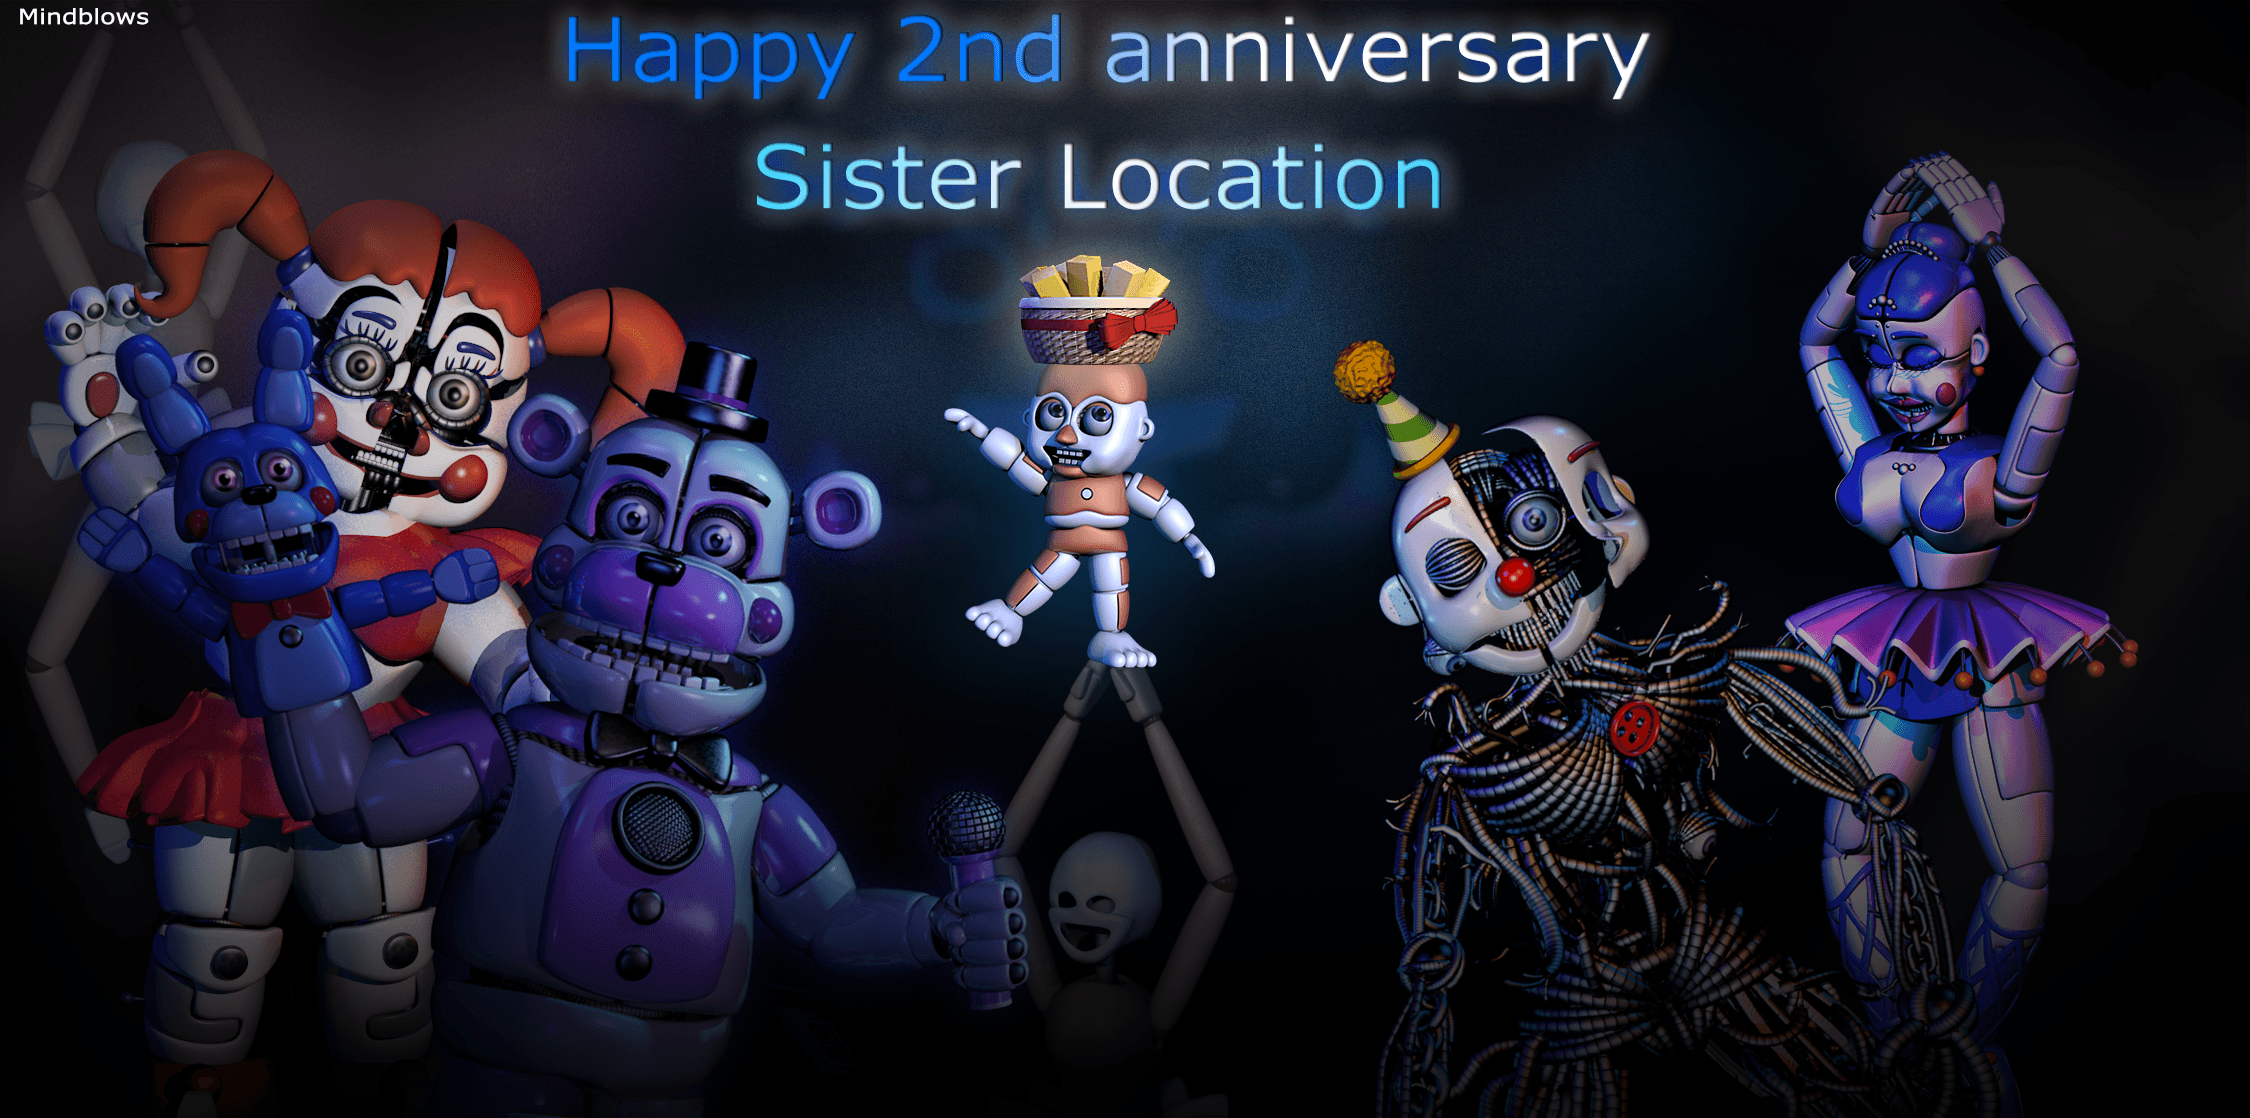 Five Nights at Freddys Sister Location Wallpaper  Imgur